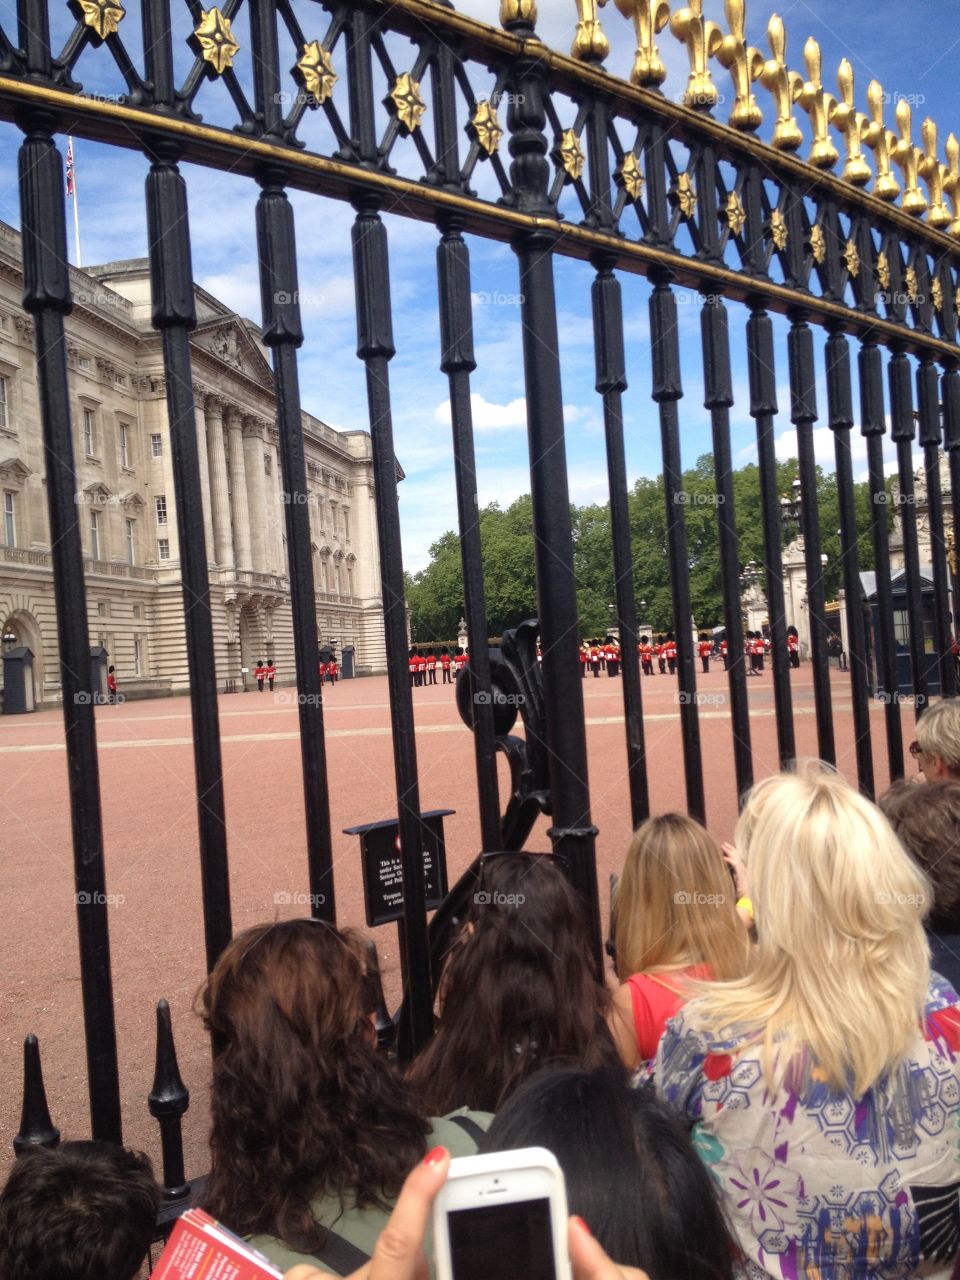 People watching the guards and waiting for the royals